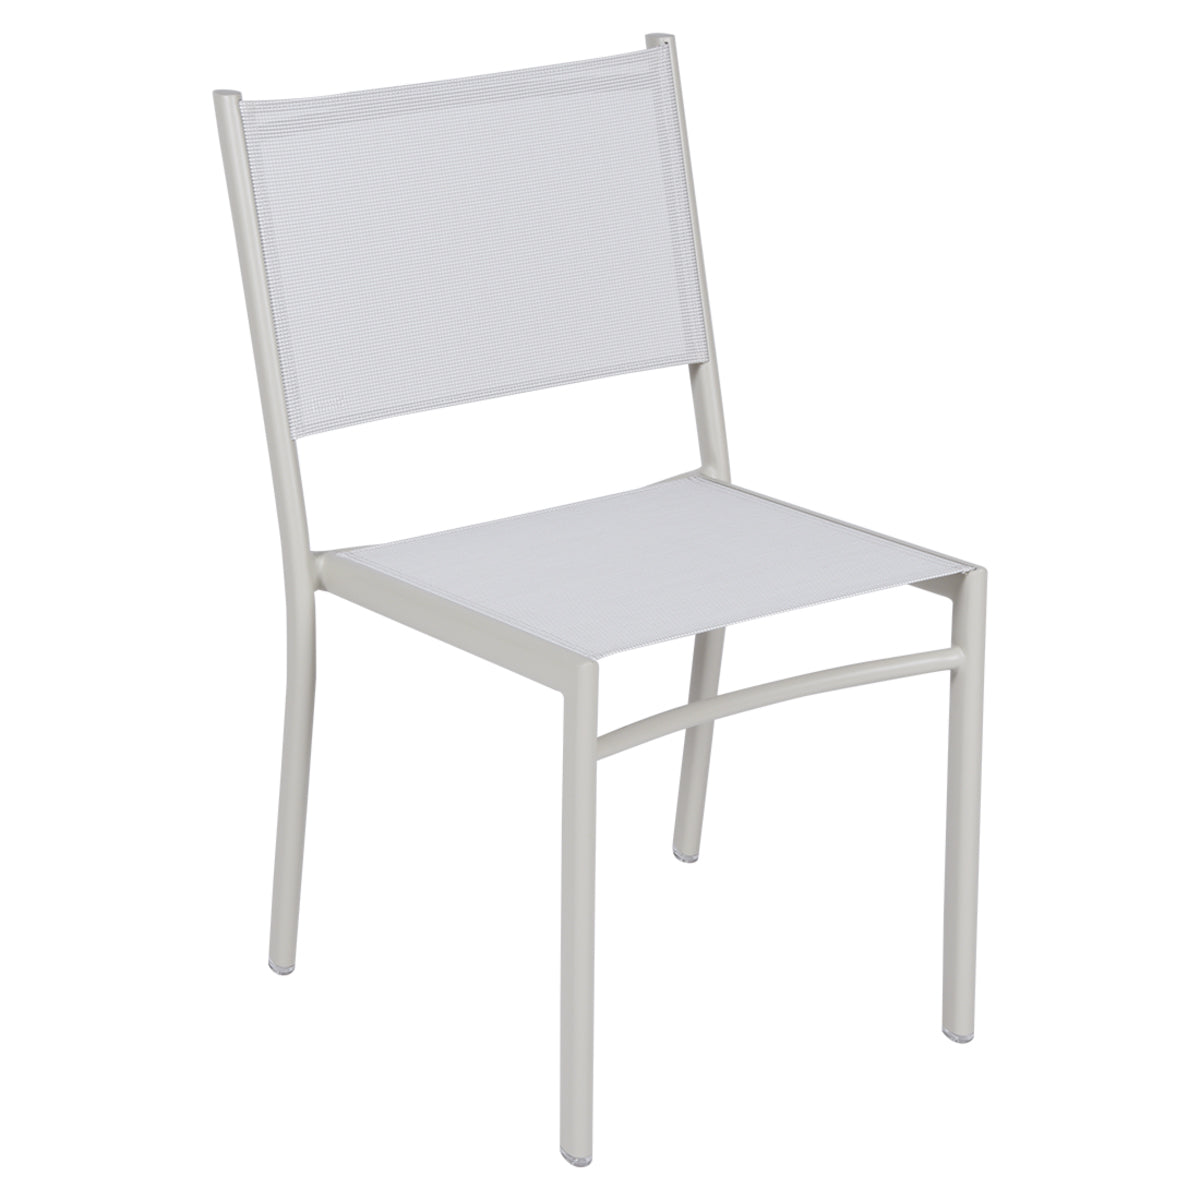 Fermob Costa Stacking Dining Chair